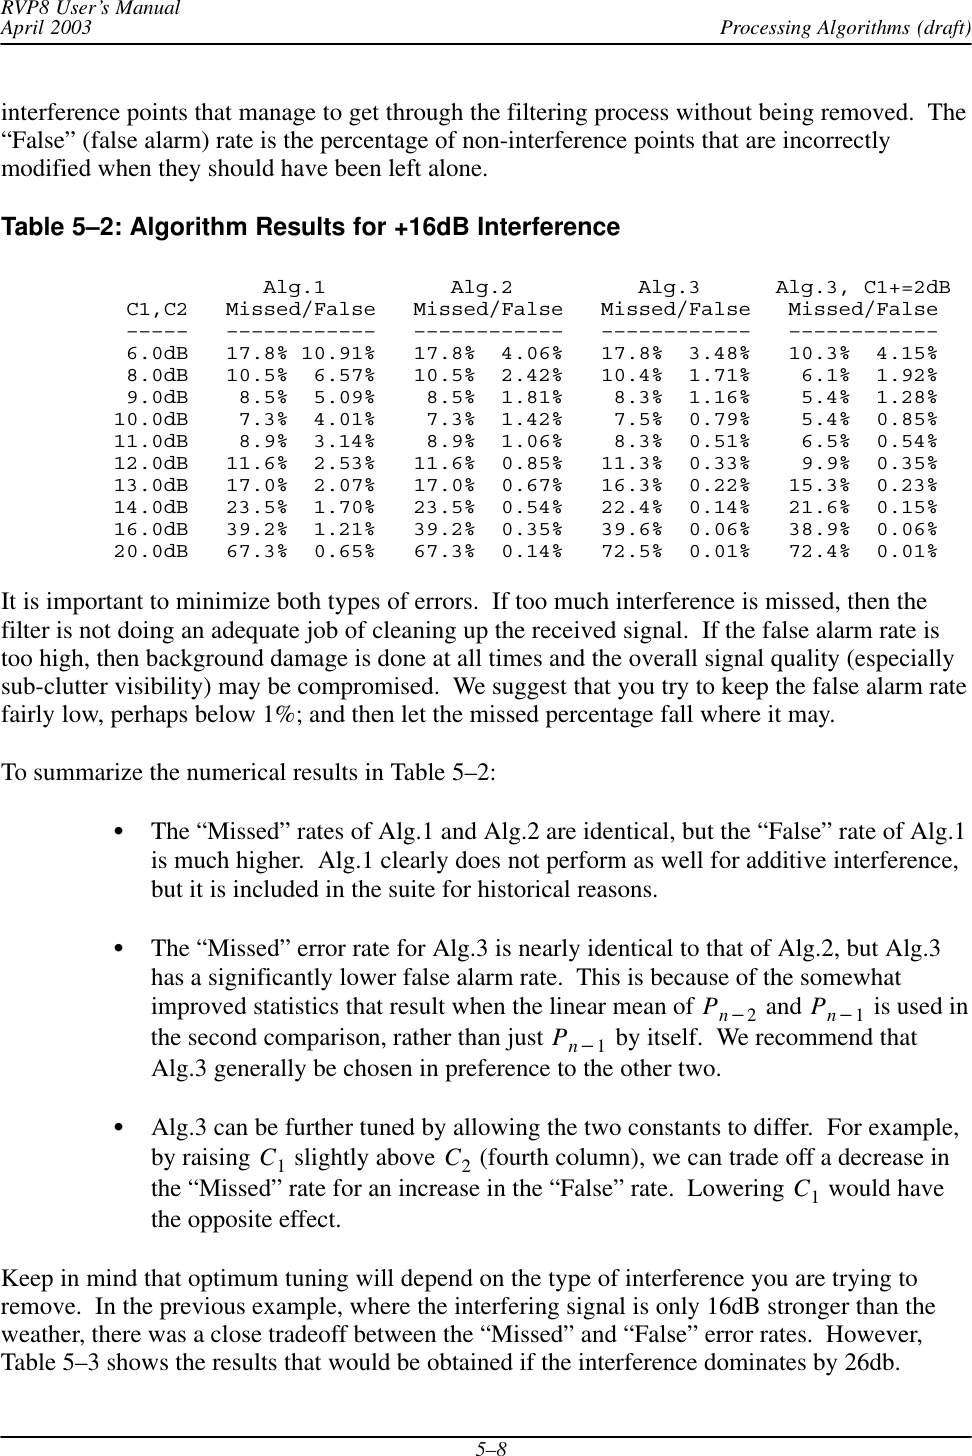 Processing Algorithms (draft)RVP8 User’s ManualApril 20035–8interference points that manage to get through the filtering process without being removed.  The“False” (false alarm) rate is the percentage of non-interference points that are incorrectlymodified when they should have been left alone.Table 5–2: Algorithm Results for +16dB Interference            Alg.1          Alg.2          Alg.3      Alg.3, C1+=2dB C1,C2   Missed/False   Missed/False   Missed/False   Missed/False –––––   ––––––––––––   ––––––––––––   ––––––––––––   –––––––––––– 6.0dB   17.8% 10.91%   17.8%  4.06%   17.8%  3.48%   10.3%  4.15% 8.0dB   10.5%  6.57%   10.5%  2.42%   10.4%  1.71%    6.1%  1.92% 9.0dB    8.5%  5.09%    8.5%  1.81%    8.3%  1.16%    5.4%  1.28%10.0dB    7.3%  4.01%    7.3%  1.42%    7.5%  0.79%    5.4%  0.85%11.0dB    8.9%  3.14%    8.9%  1.06%    8.3%  0.51%    6.5%  0.54%12.0dB   11.6%  2.53%   11.6%  0.85%   11.3%  0.33%    9.9%  0.35%13.0dB   17.0%  2.07%   17.0%  0.67%   16.3%  0.22%   15.3%  0.23%14.0dB   23.5%  1.70%   23.5%  0.54%   22.4%  0.14%   21.6%  0.15%16.0dB   39.2%  1.21%   39.2%  0.35%   39.6%  0.06%   38.9%  0.06%20.0dB   67.3%  0.65%   67.3%  0.14%   72.5%  0.01%   72.4%  0.01%It is important to minimize both types of errors.  If too much interference is missed, then thefilter is not doing an adequate job of cleaning up the received signal.  If the false alarm rate istoo high, then background damage is done at all times and the overall signal quality (especiallysub-clutter visibility) may be compromised.  We suggest that you try to keep the false alarm ratefairly low, perhaps below 1%; and then let the missed percentage fall where it may.To summarize the numerical results in Table 5–2:SThe “Missed” rates of Alg.1 and Alg.2 are identical, but the “False” rate of Alg.1is much higher.  Alg.1 clearly does not perform as well for additive interference,but it is included in the suite for historical reasons.SThe “Missed” error rate for Alg.3 is nearly identical to that of Alg.2, but Alg.3has a significantly lower false alarm rate.  This is because of the somewhatimproved statistics that result when the linear mean of Pn*2 and Pn*1 is used inthe second comparison, rather than just Pn*1 by itself.  We recommend thatAlg.3 generally be chosen in preference to the other two.SAlg.3 can be further tuned by allowing the two constants to differ.  For example,by raising C1 slightly above C2 (fourth column), we can trade off a decrease inthe “Missed” rate for an increase in the “False” rate.  Lowering C1 would havethe opposite effect.Keep in mind that optimum tuning will depend on the type of interference you are trying toremove.  In the previous example, where the interfering signal is only 16dB stronger than theweather, there was a close tradeoff between the “Missed” and “False” error rates.  However,Table 5–3 shows the results that would be obtained if the interference dominates by 26db.